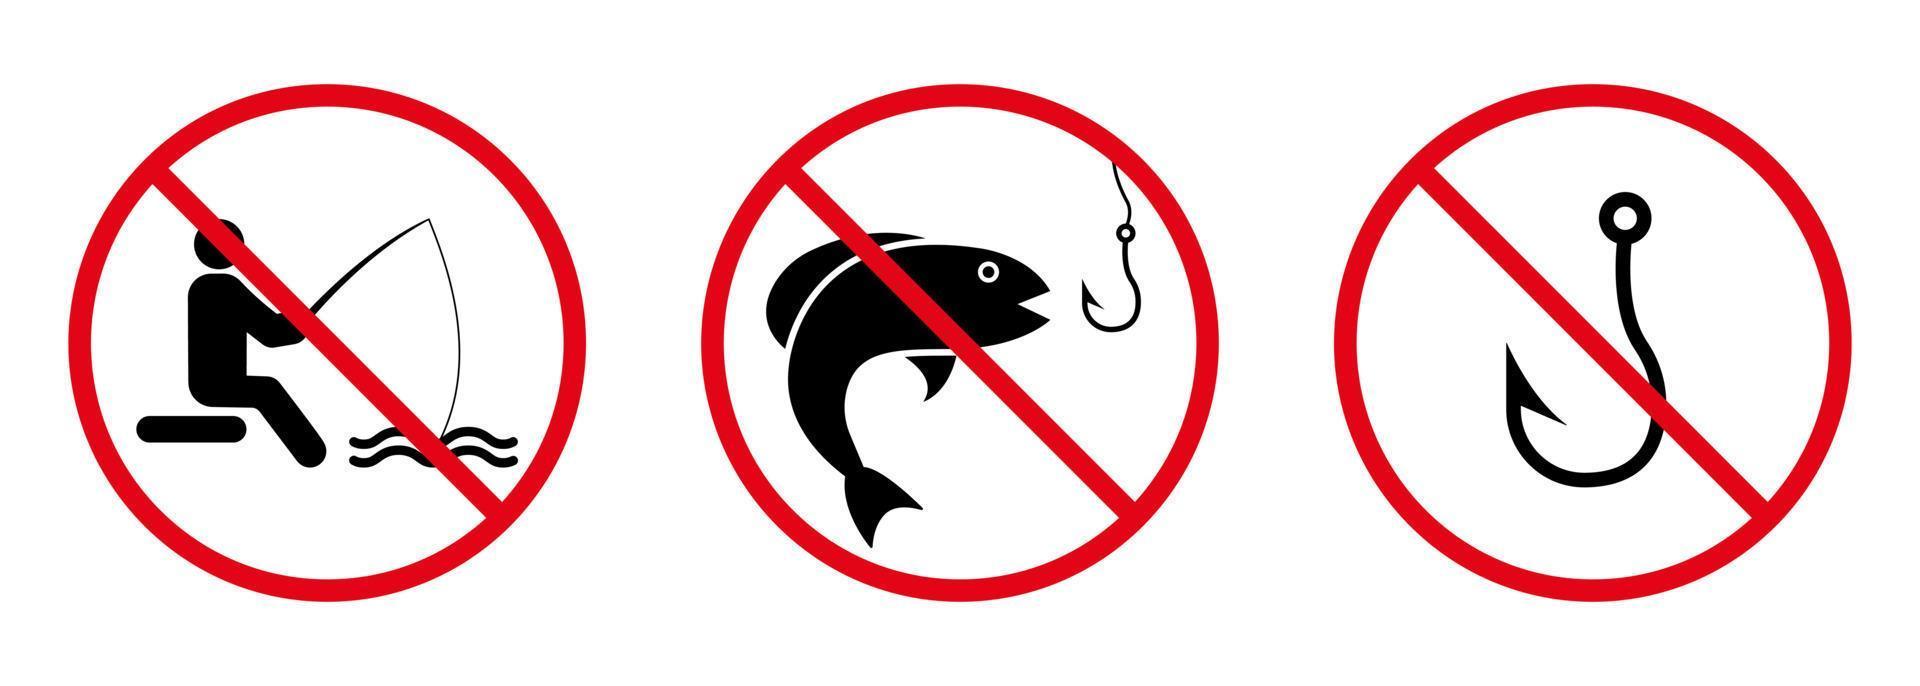 Forbidden Fishing Hook Fish Black Silhouette Icon Set. Fisherman Red Stop Circle Symbol. No Allowed Catch Fish in Lake Sign. Fisher Man Prohibited. Ban Fishing Pictogram. Isolated Vector Illustration.